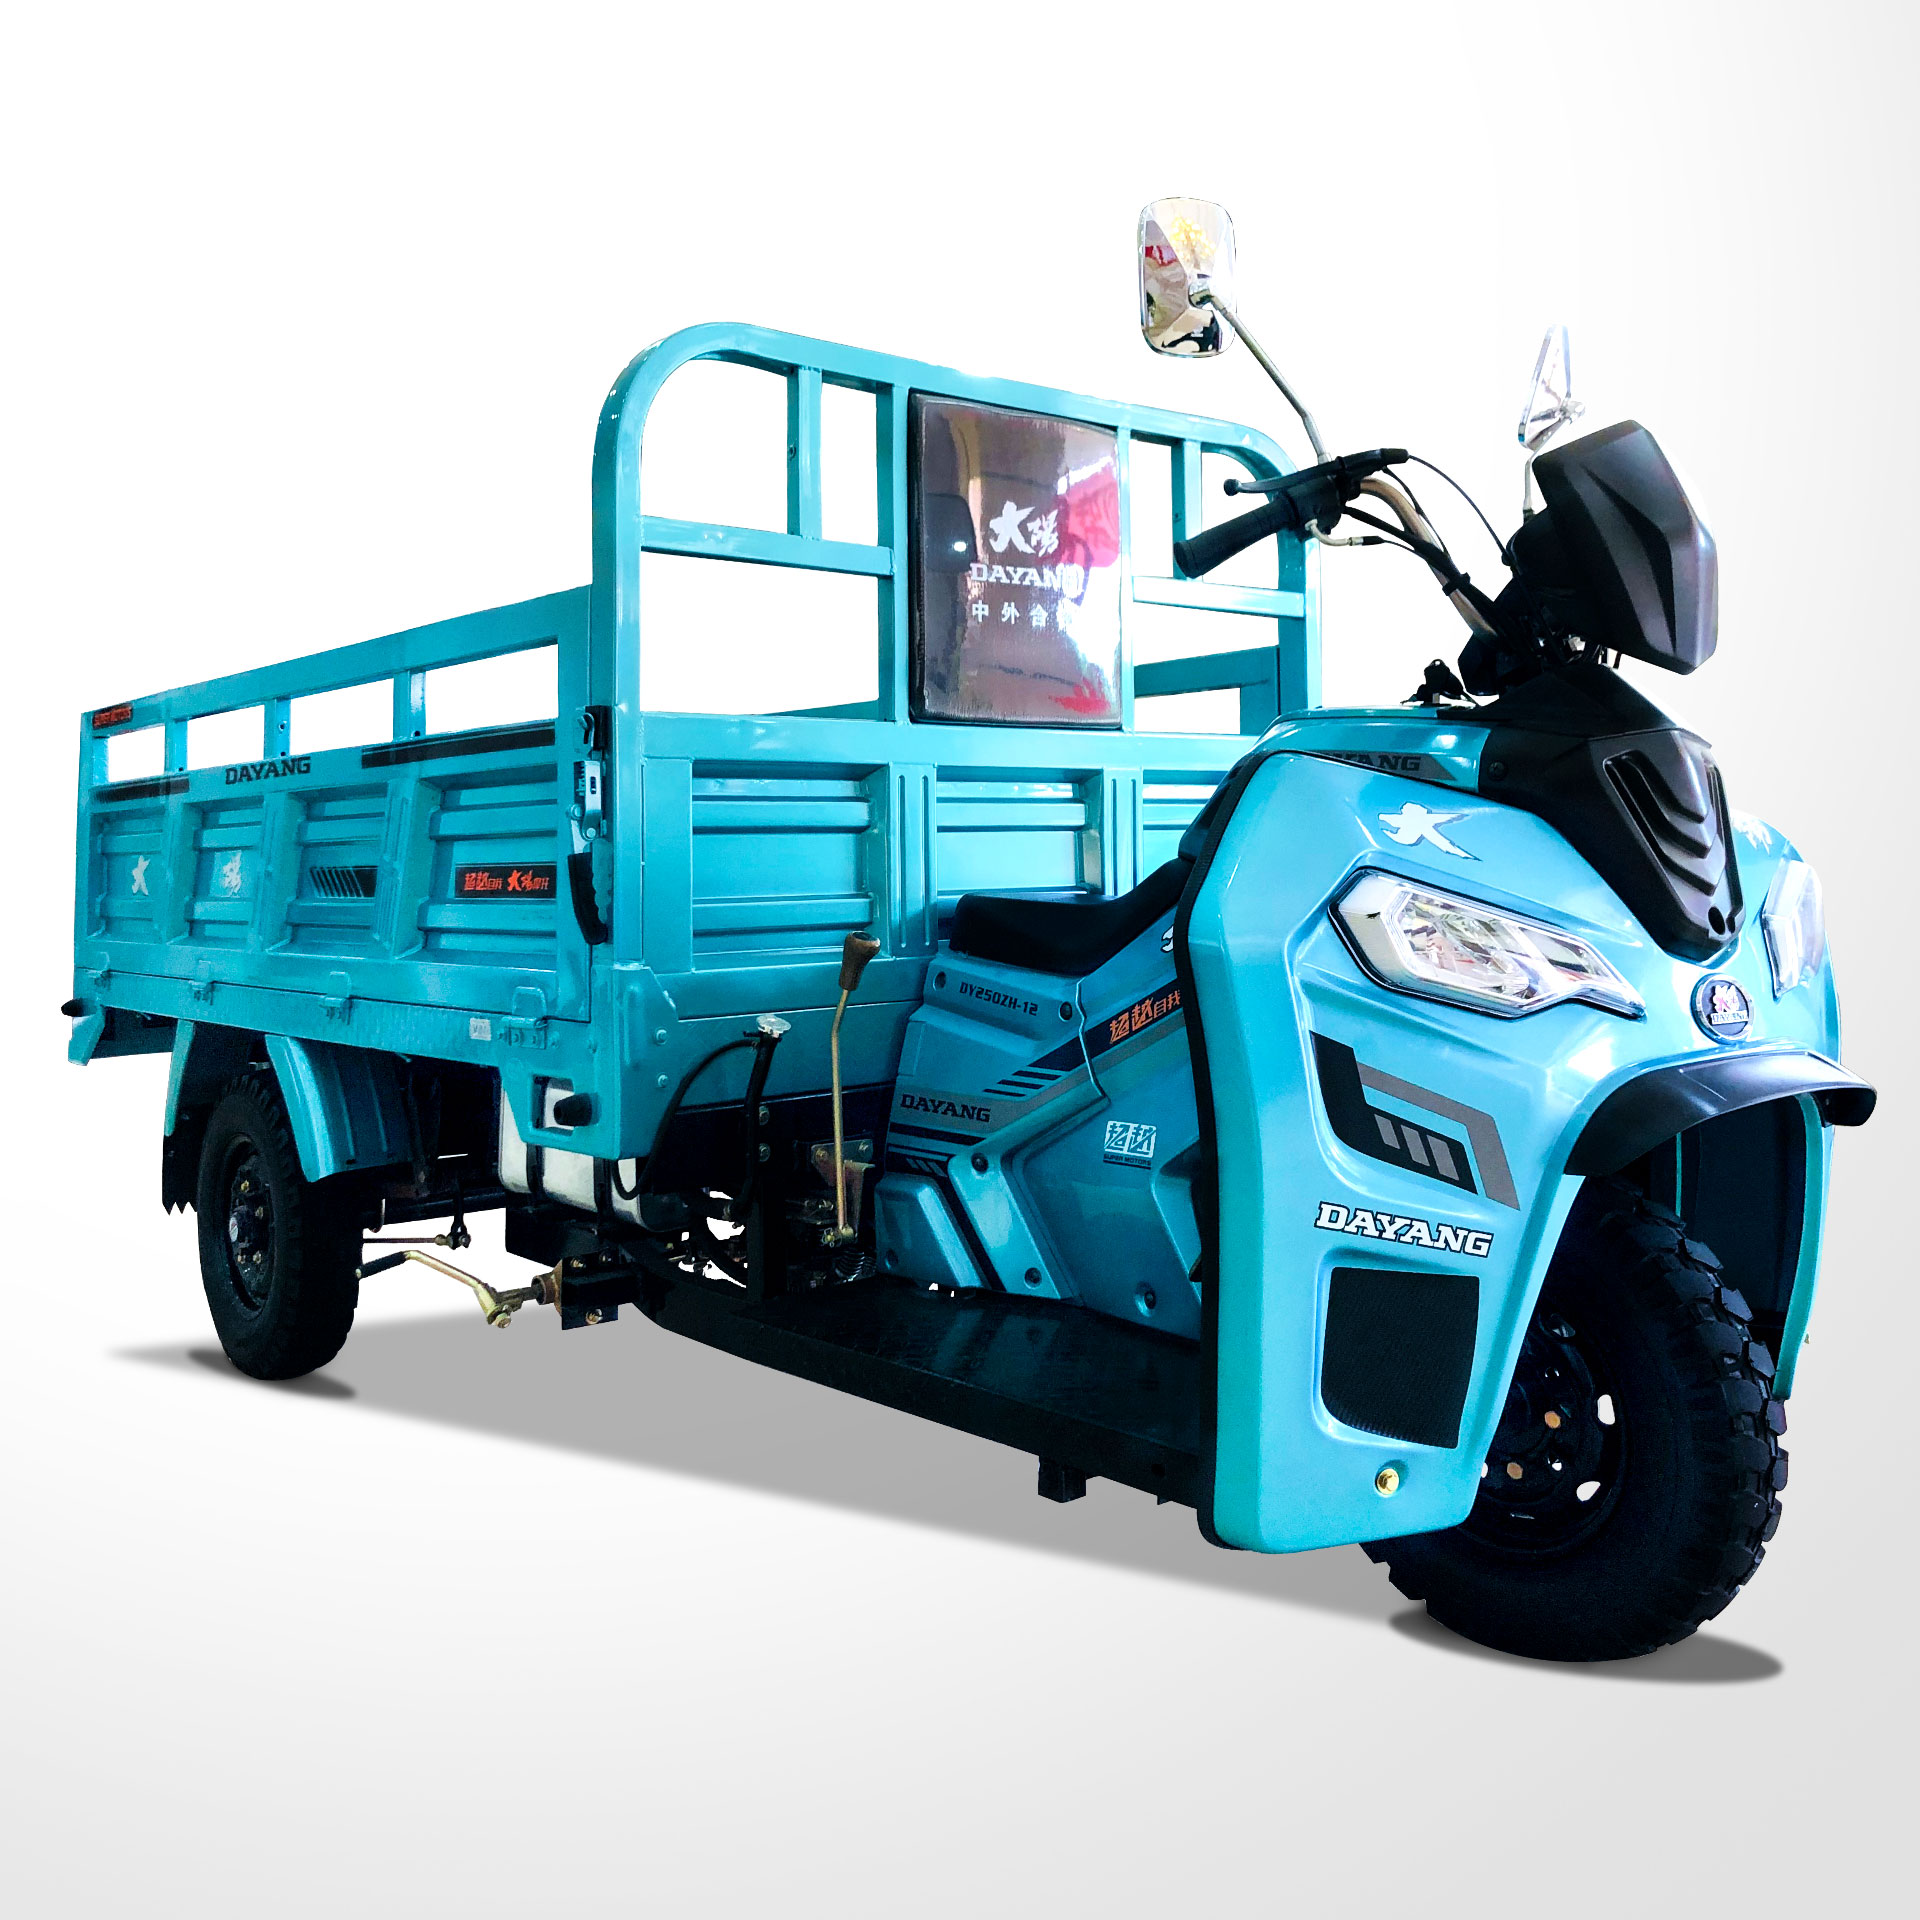 Tanzania Stability cargo 250cc cargo motorcycle tricycle passenger carrying tricycle